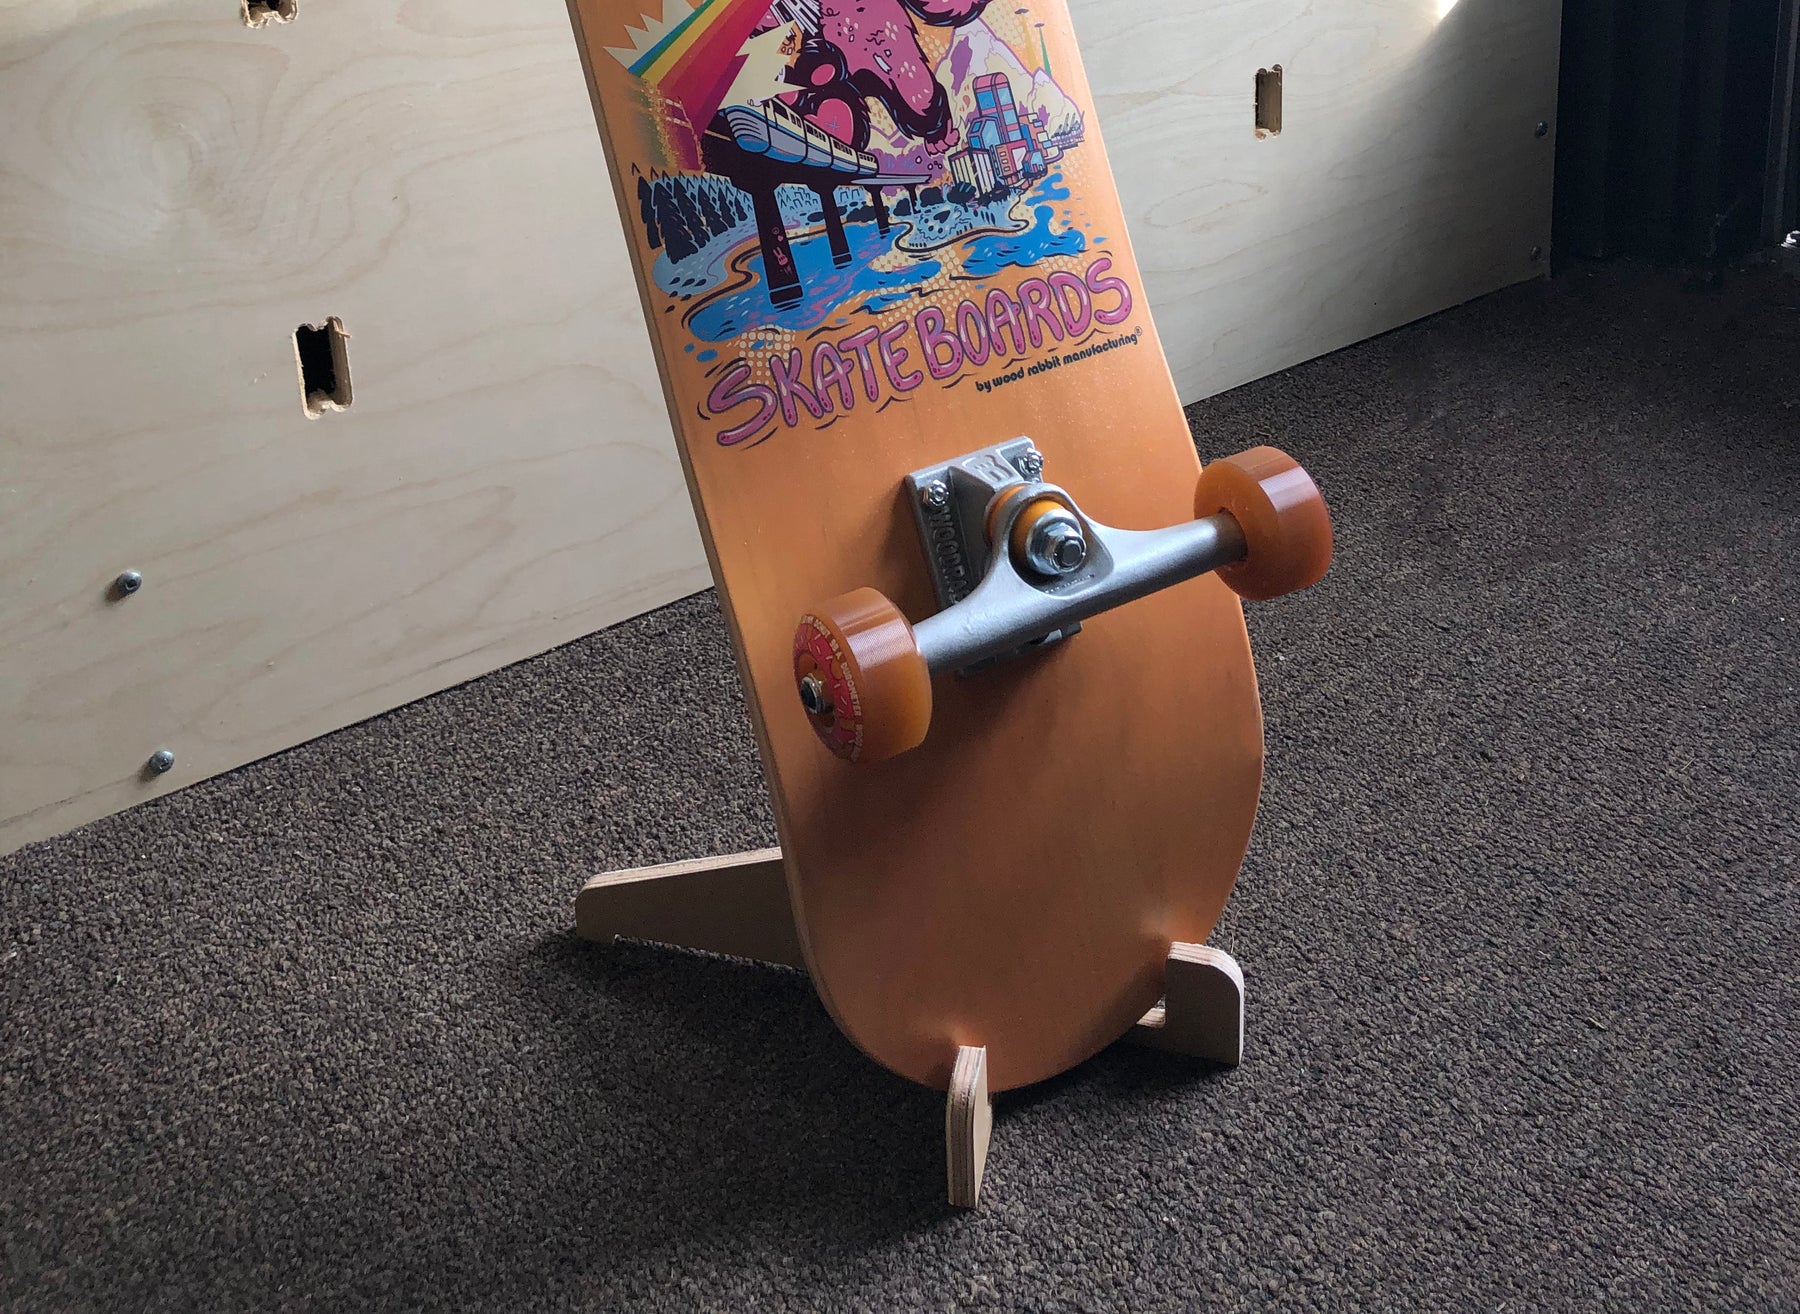 SB | Skateboard Floor Stand, Storage & Display - Great gift for and adults